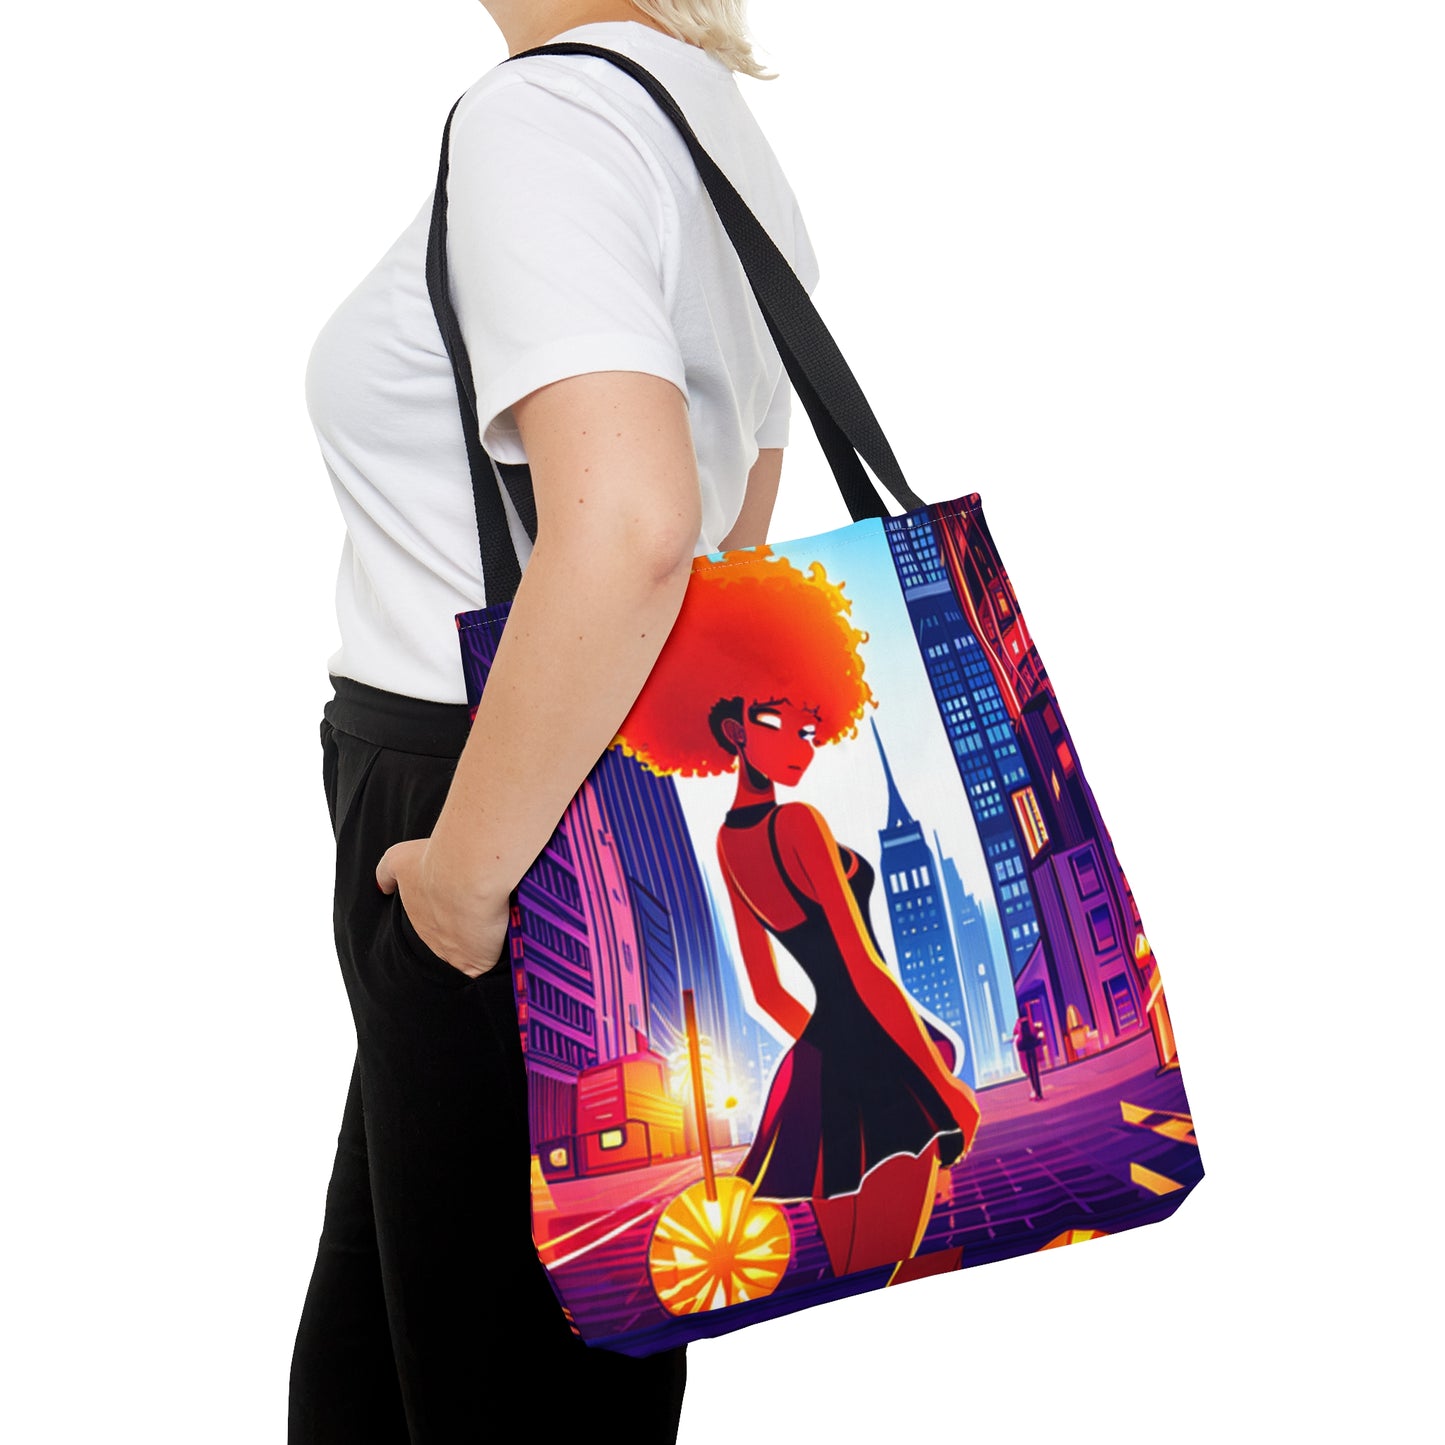 “Woman About Town” Tote